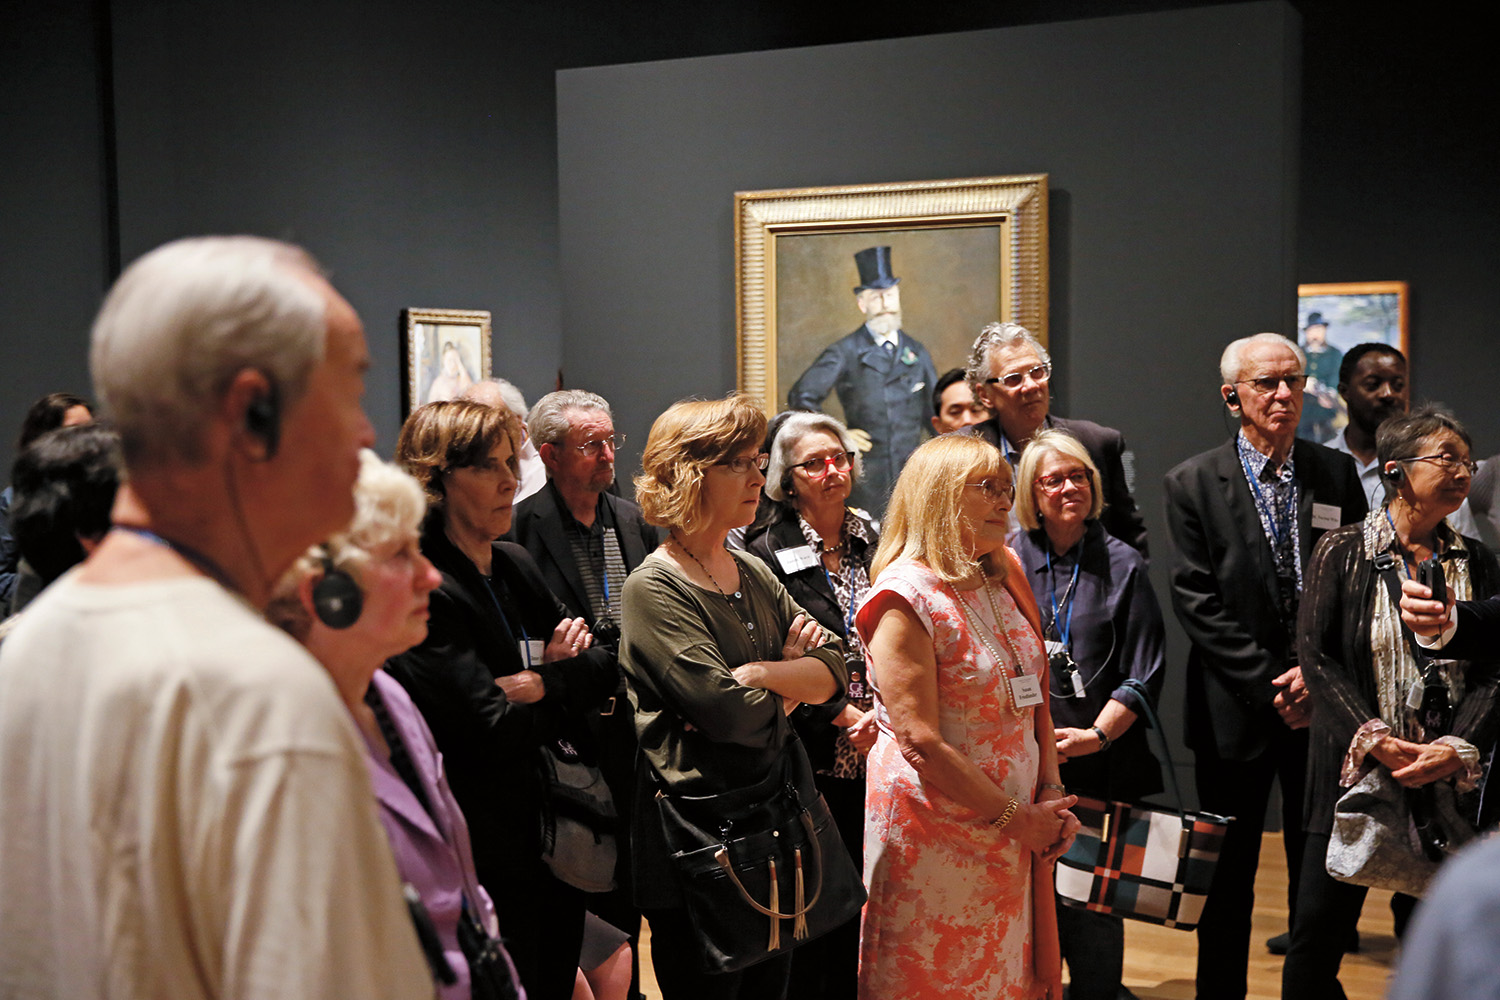 A group of visitors at the Getty Center in Los Angeles, California listen to a presentation at the art museum. 